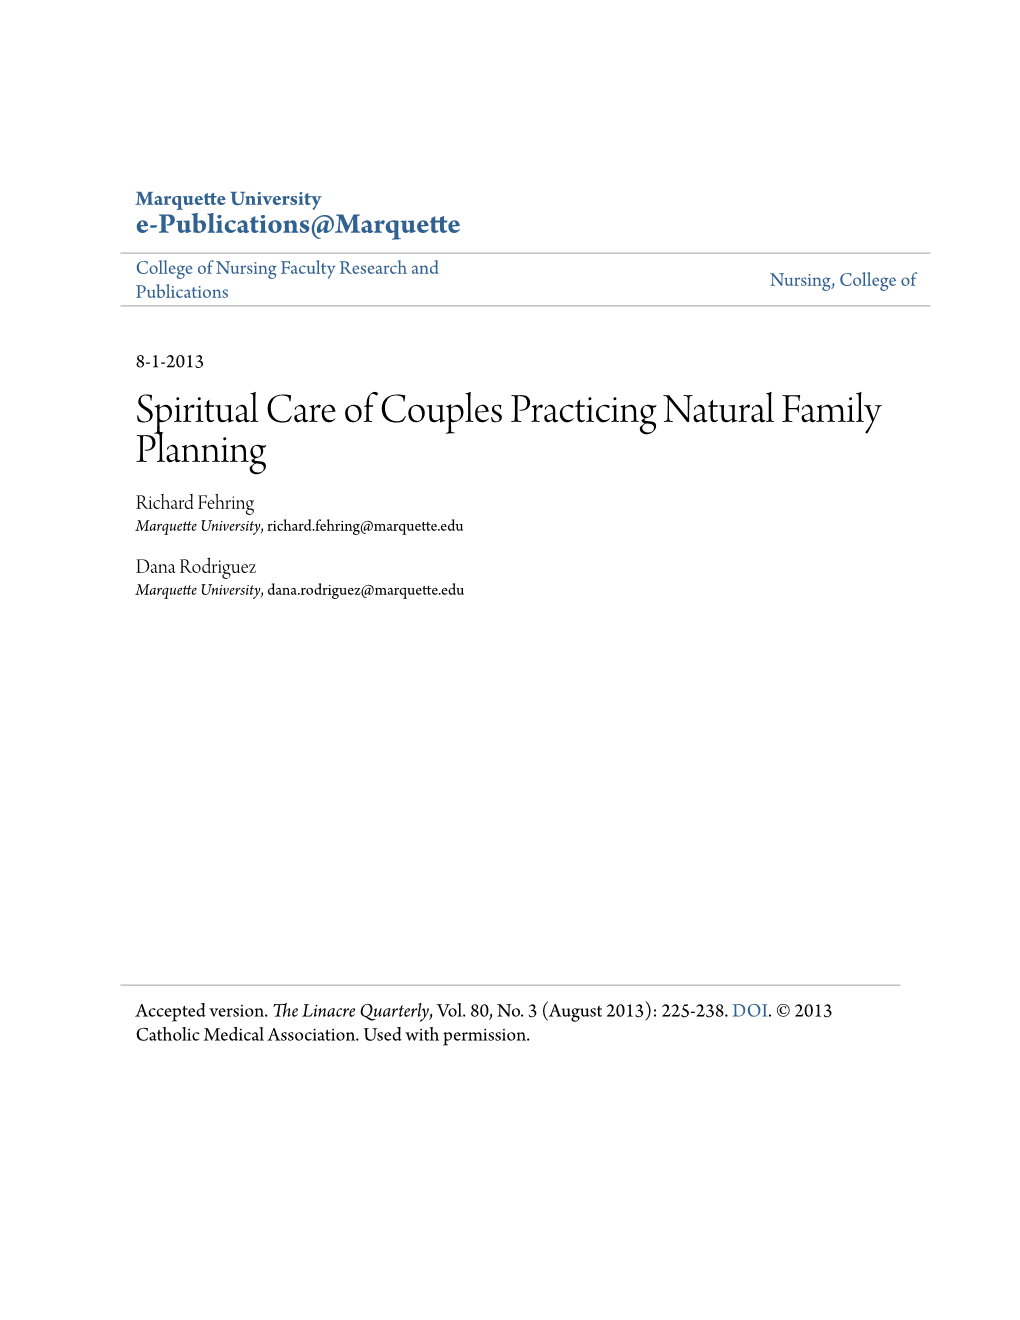 Spiritual Care of Couples Practicing Natural Family Planning Richard Fehring Marquette University, Richard.Fehring@Marquette.Edu